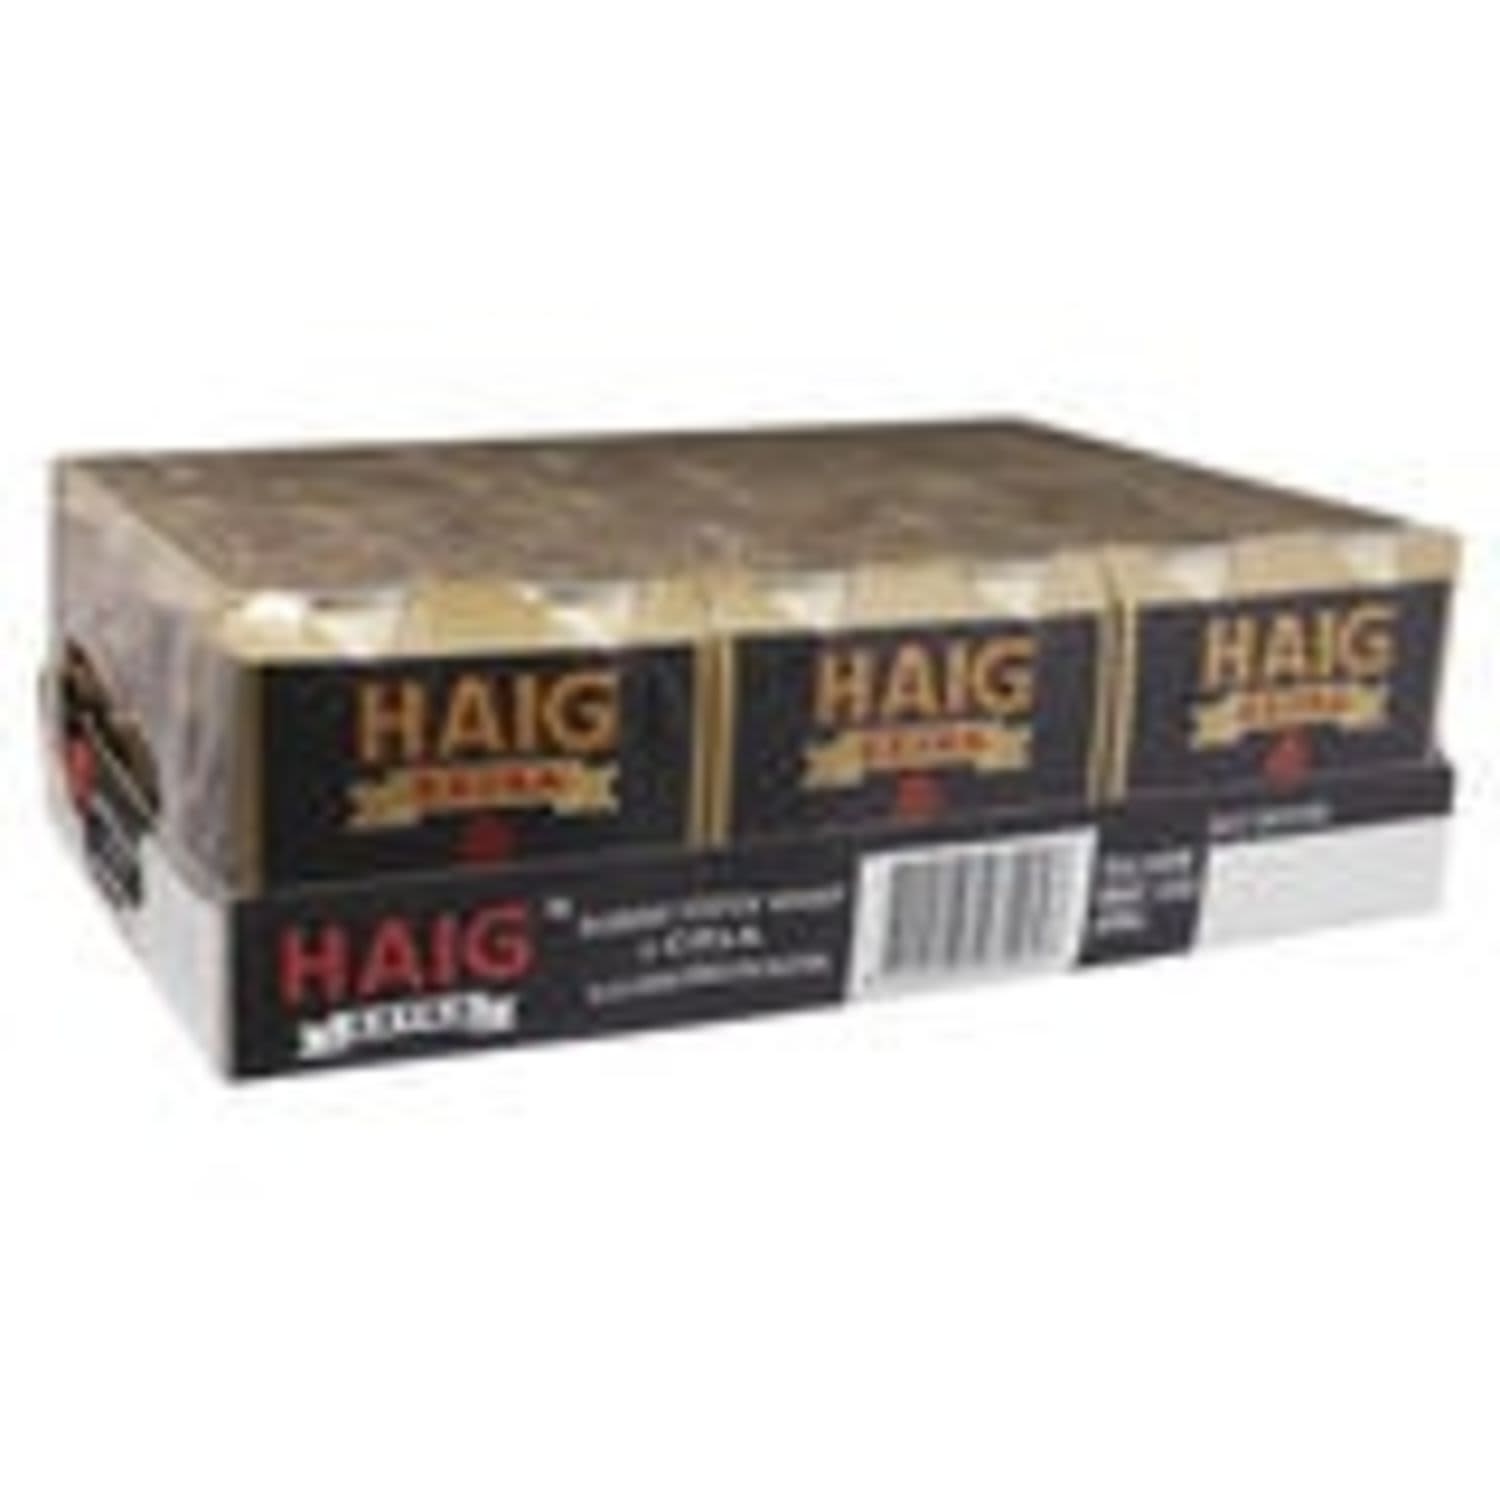 Haig Extra Blended Scotch Whisky & Cola Can 375mL 24 Pack